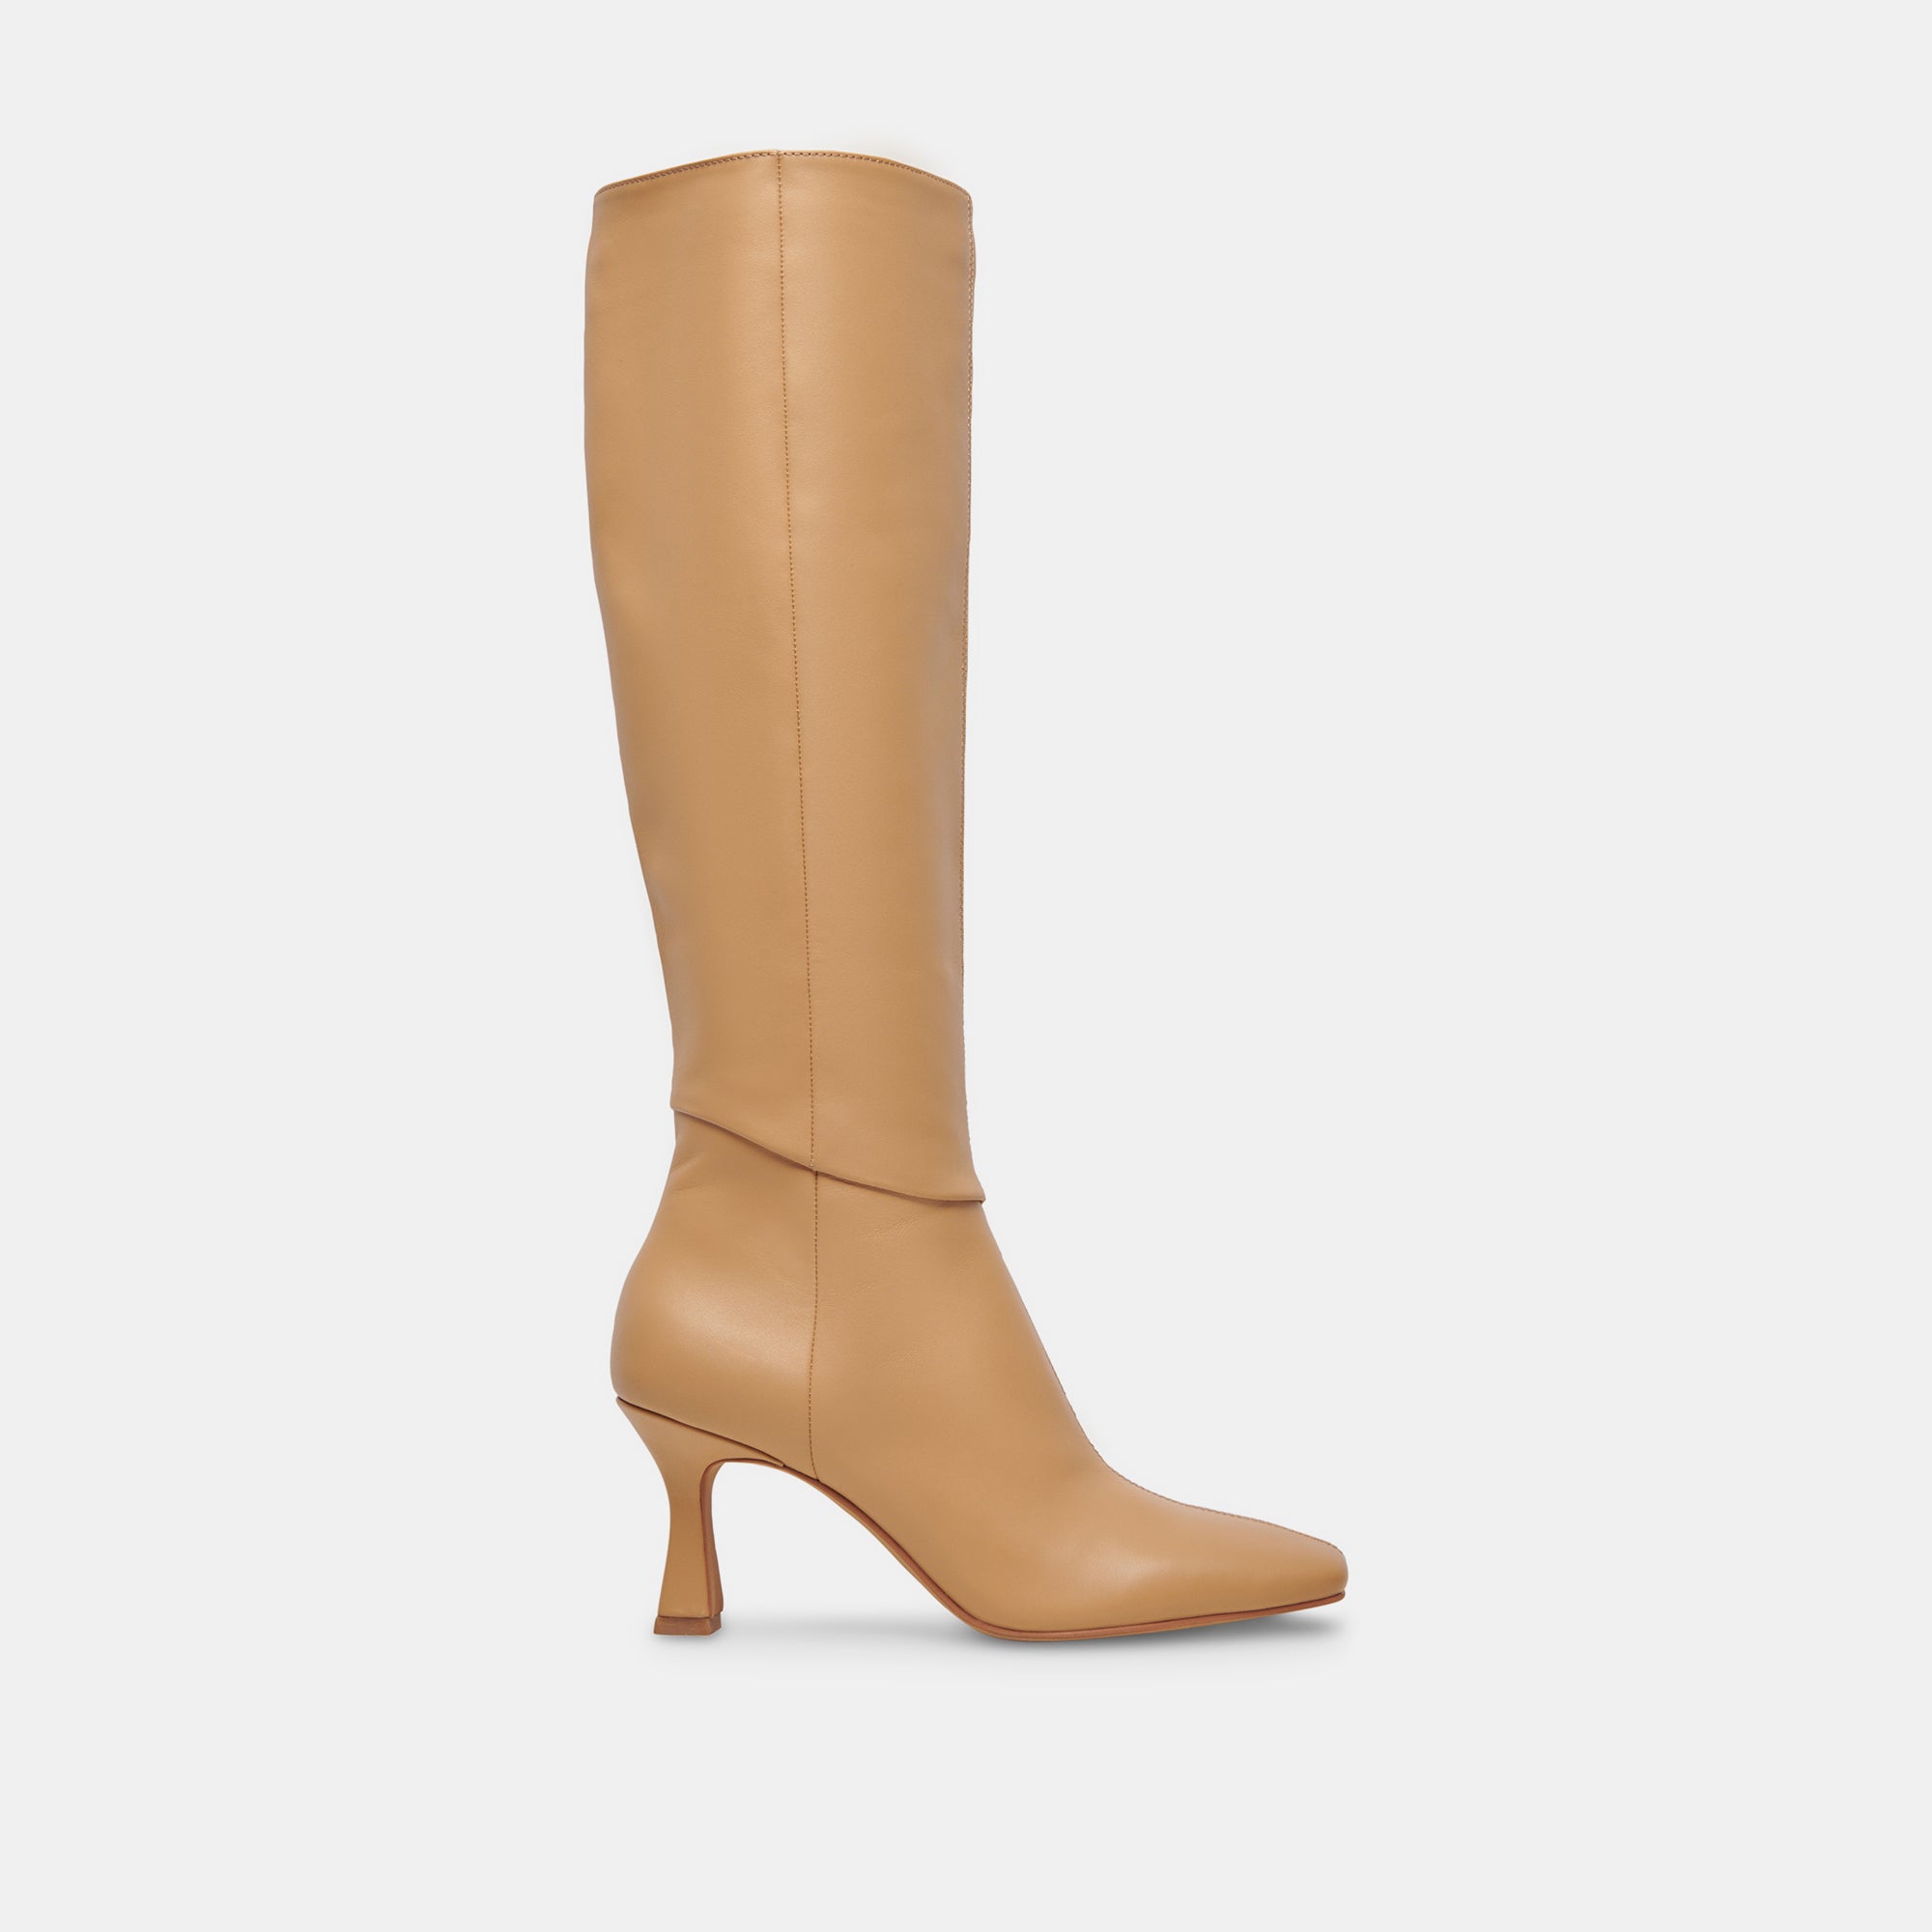 Tan Slouch Boots Chunky Heel Mid Calf Boots|FSJshoes